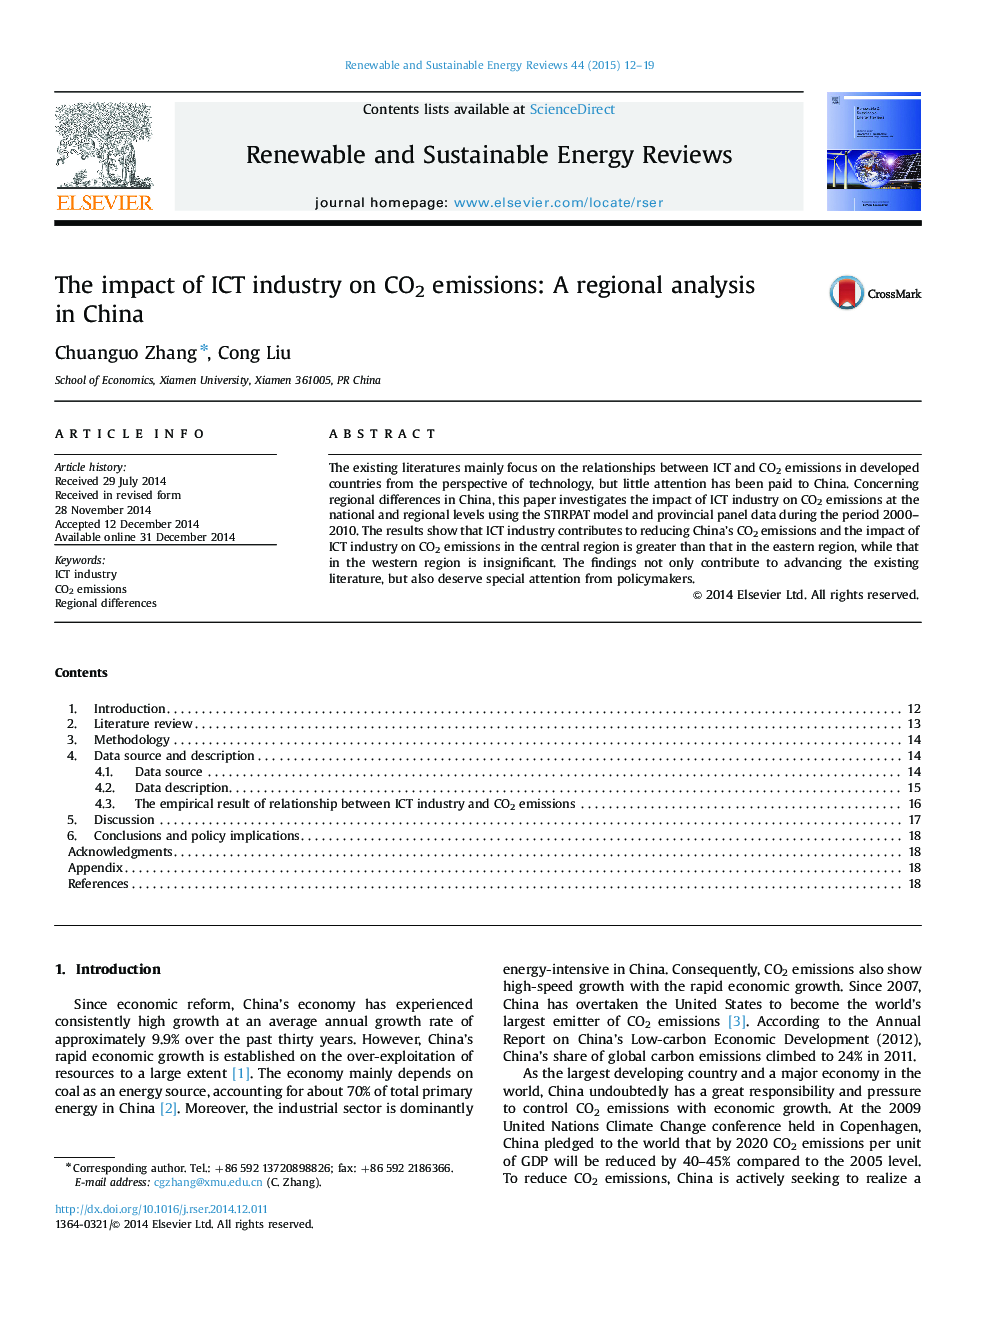 The impact of ICT industry on CO2 emissions: A regional analysis in China